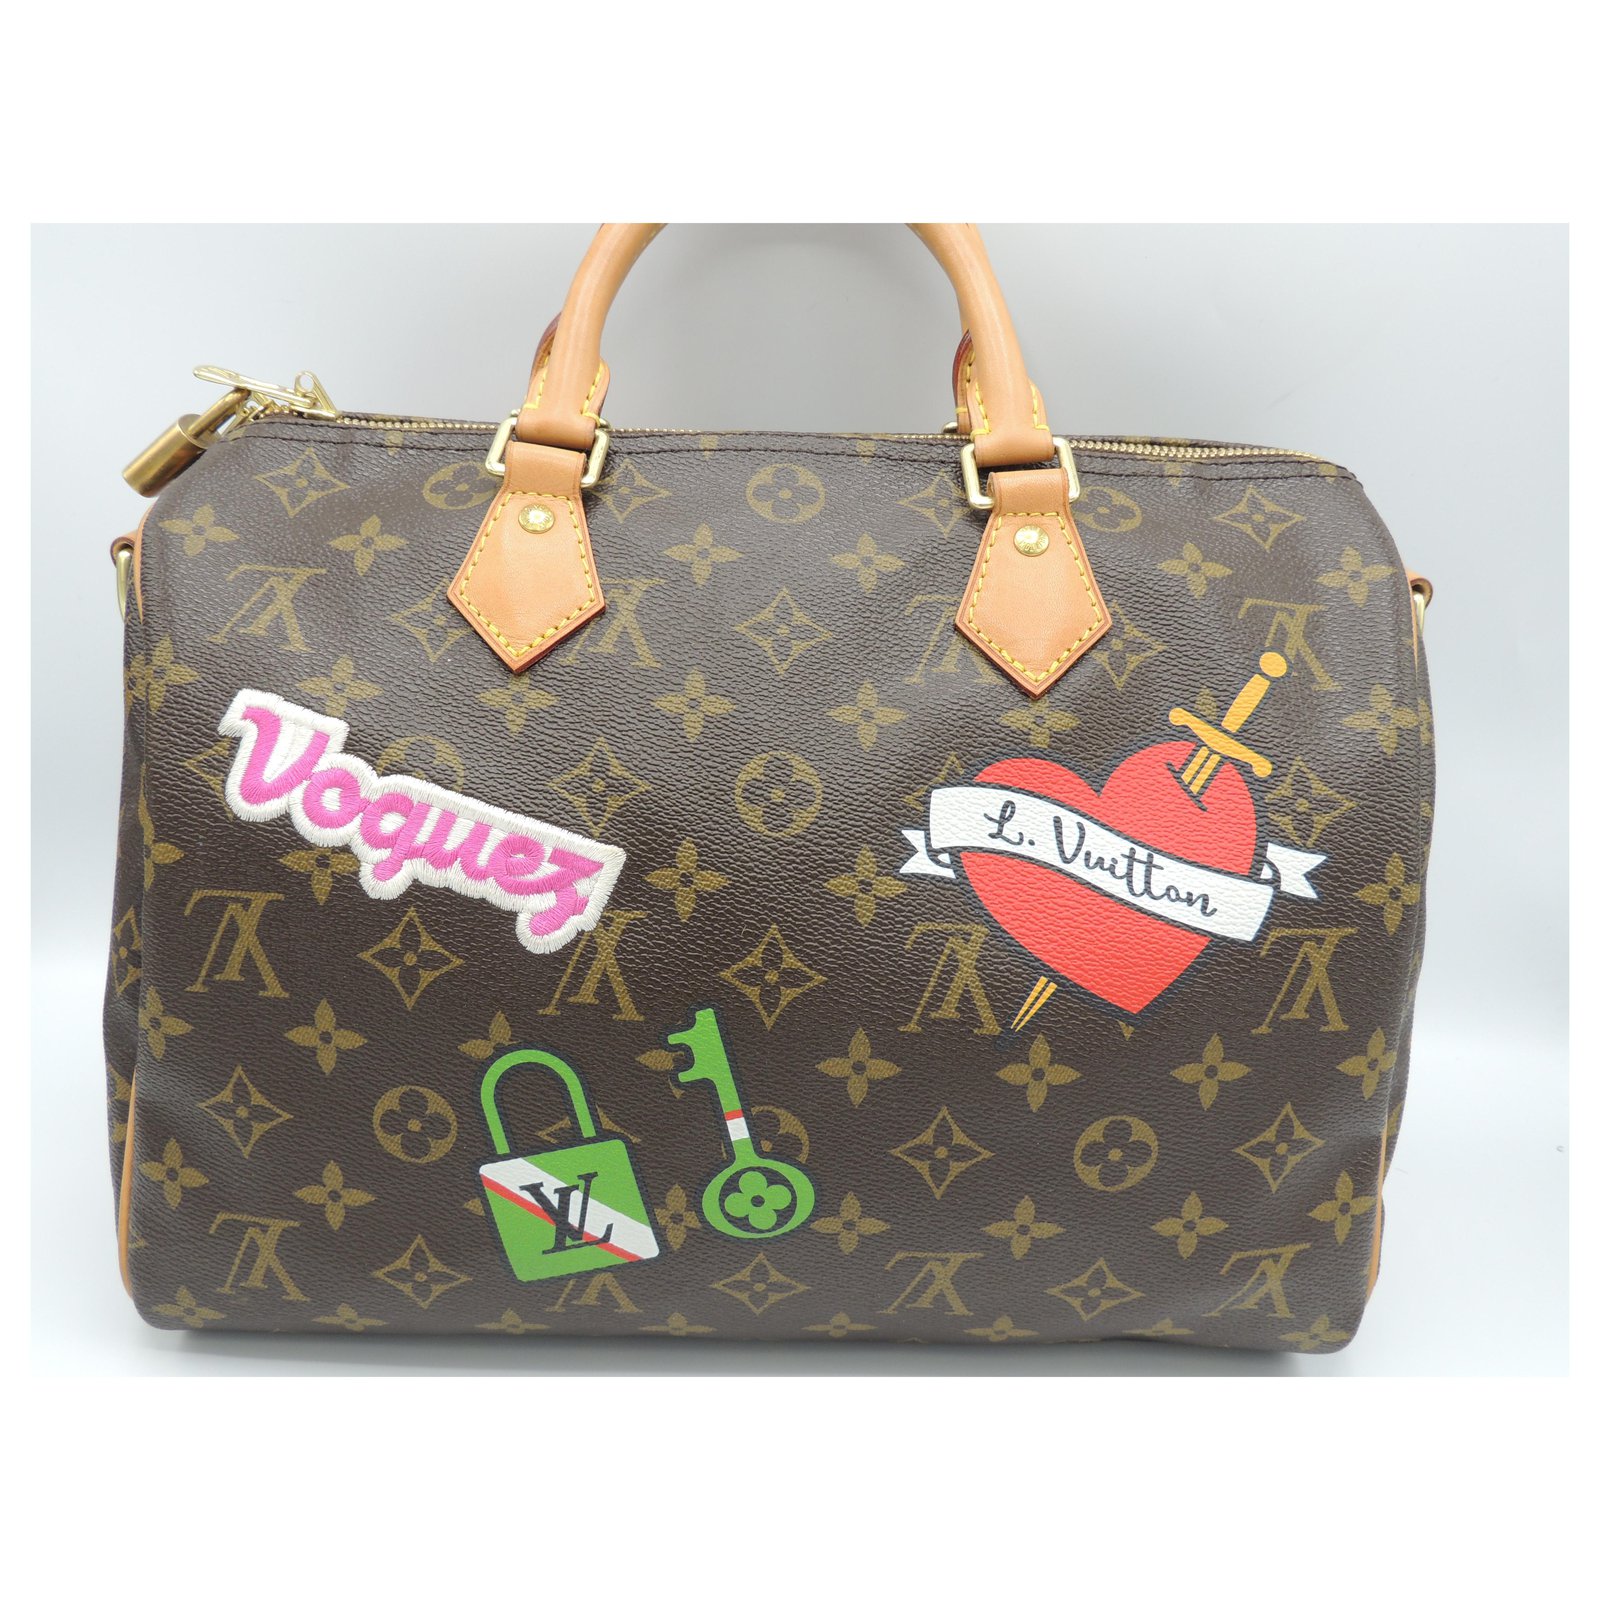 LOUIS VUITTON SPEEDY BAG 30 limited series PATCHES Multiple